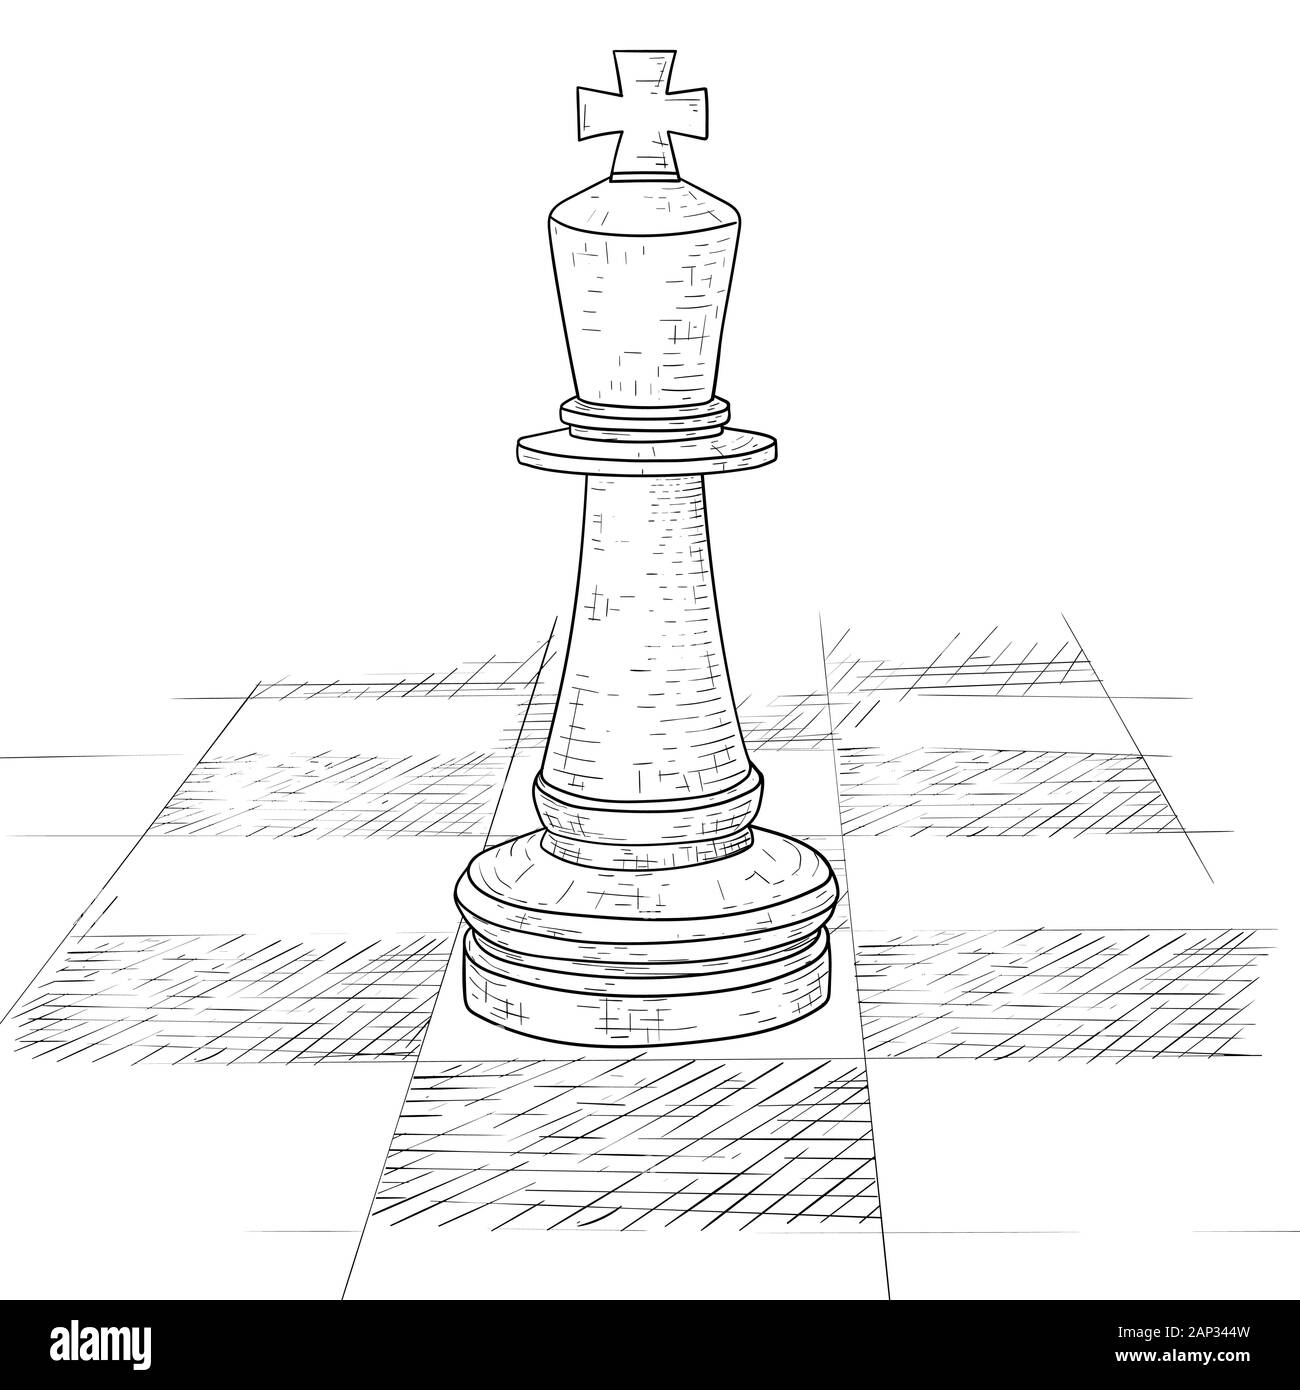 How to draw chess king easy, chess king Drawing